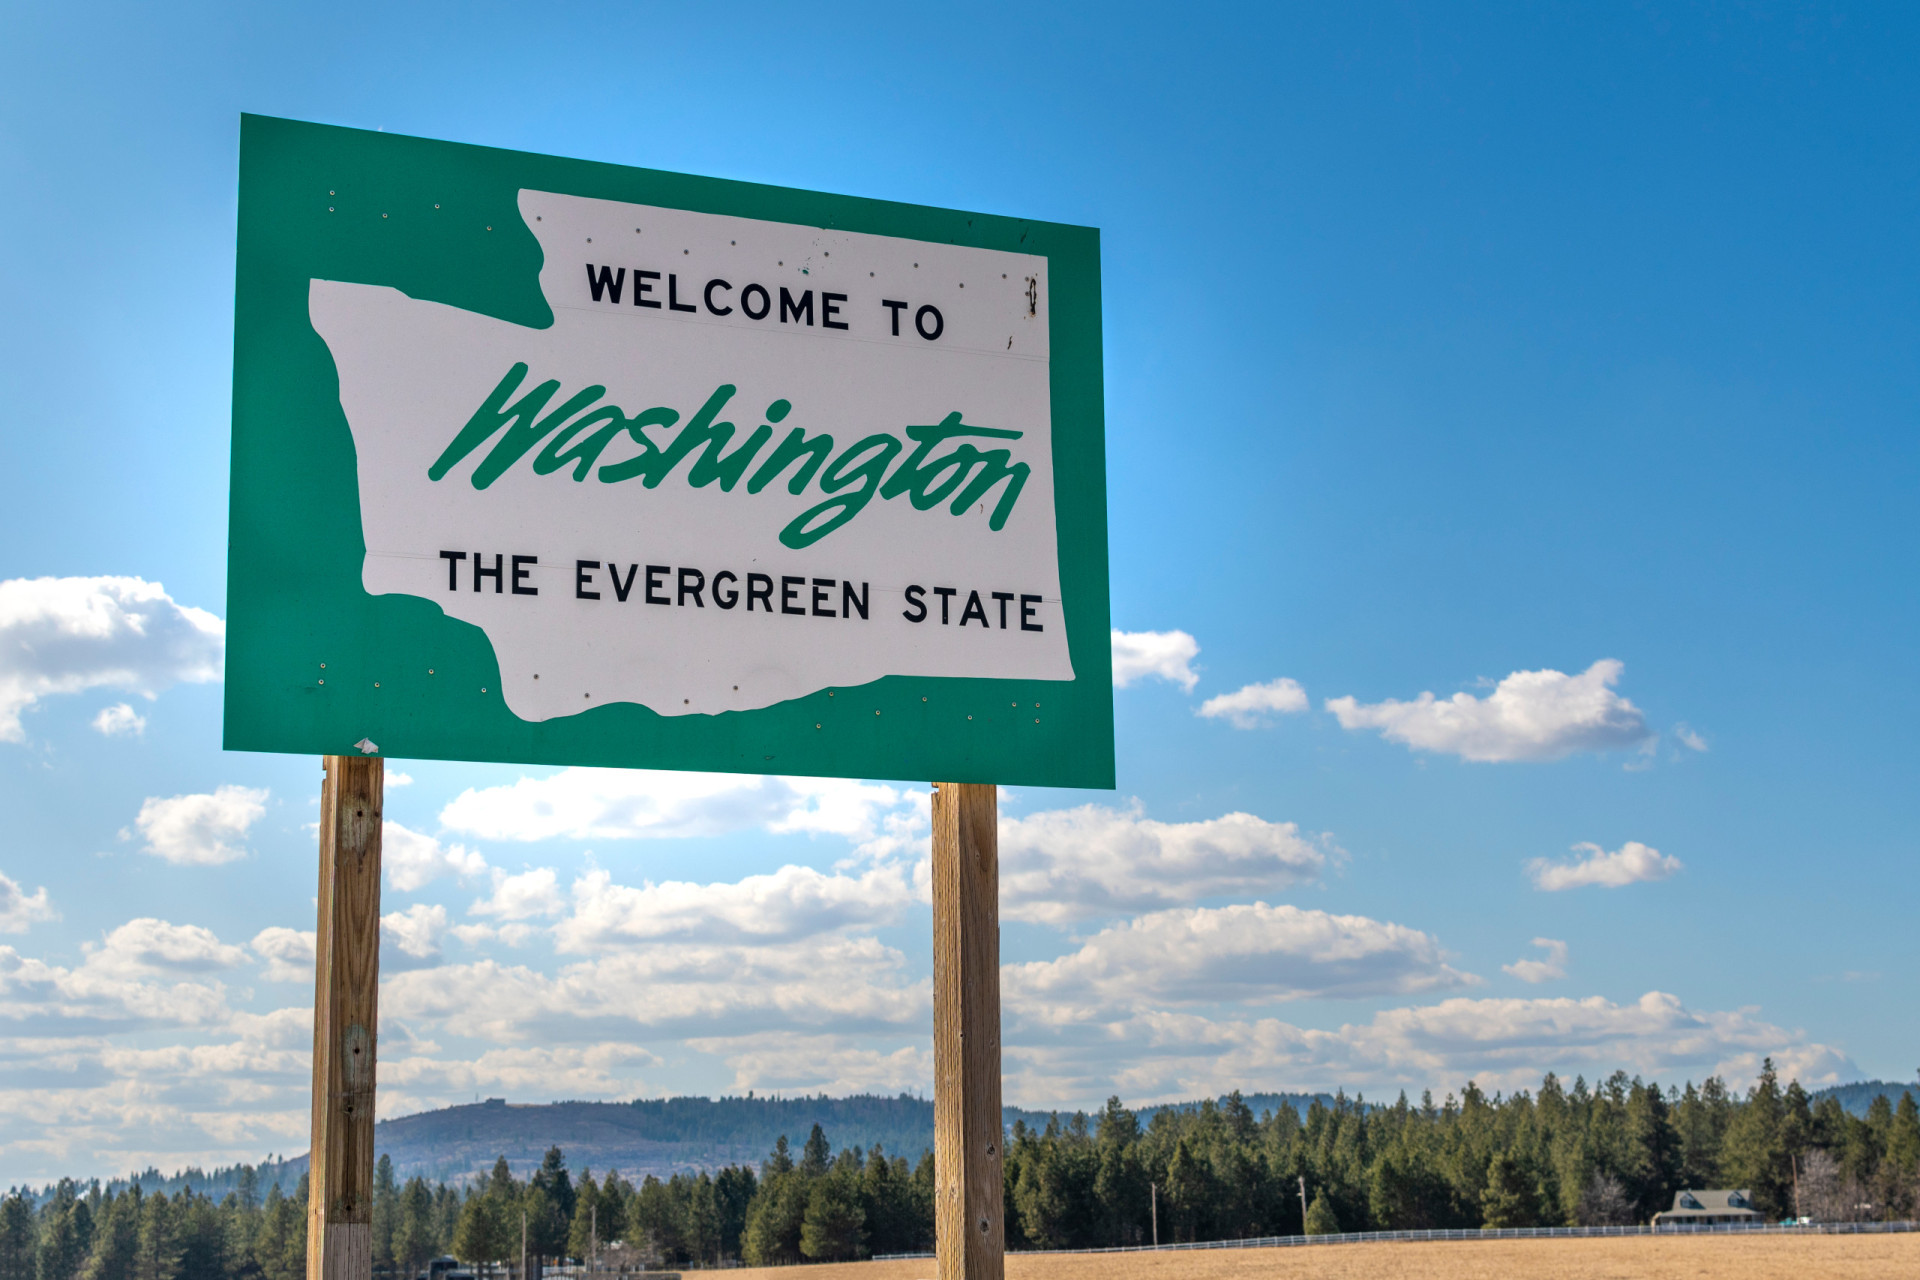 <p>The only state that is named after a president is also known as The Evergreen State, because of its verdant scenery.  </p><p><a href="https://www.msn.com/en-us/community/channel/vid-7xx8mnucu55yw63we9va2gwr7uihbxwc68fxqp25x6tg4ftibpra?cvid=94631541bc0f4f89bfd59158d696ad7e">Follow us and access great exclusive content every day</a></p>